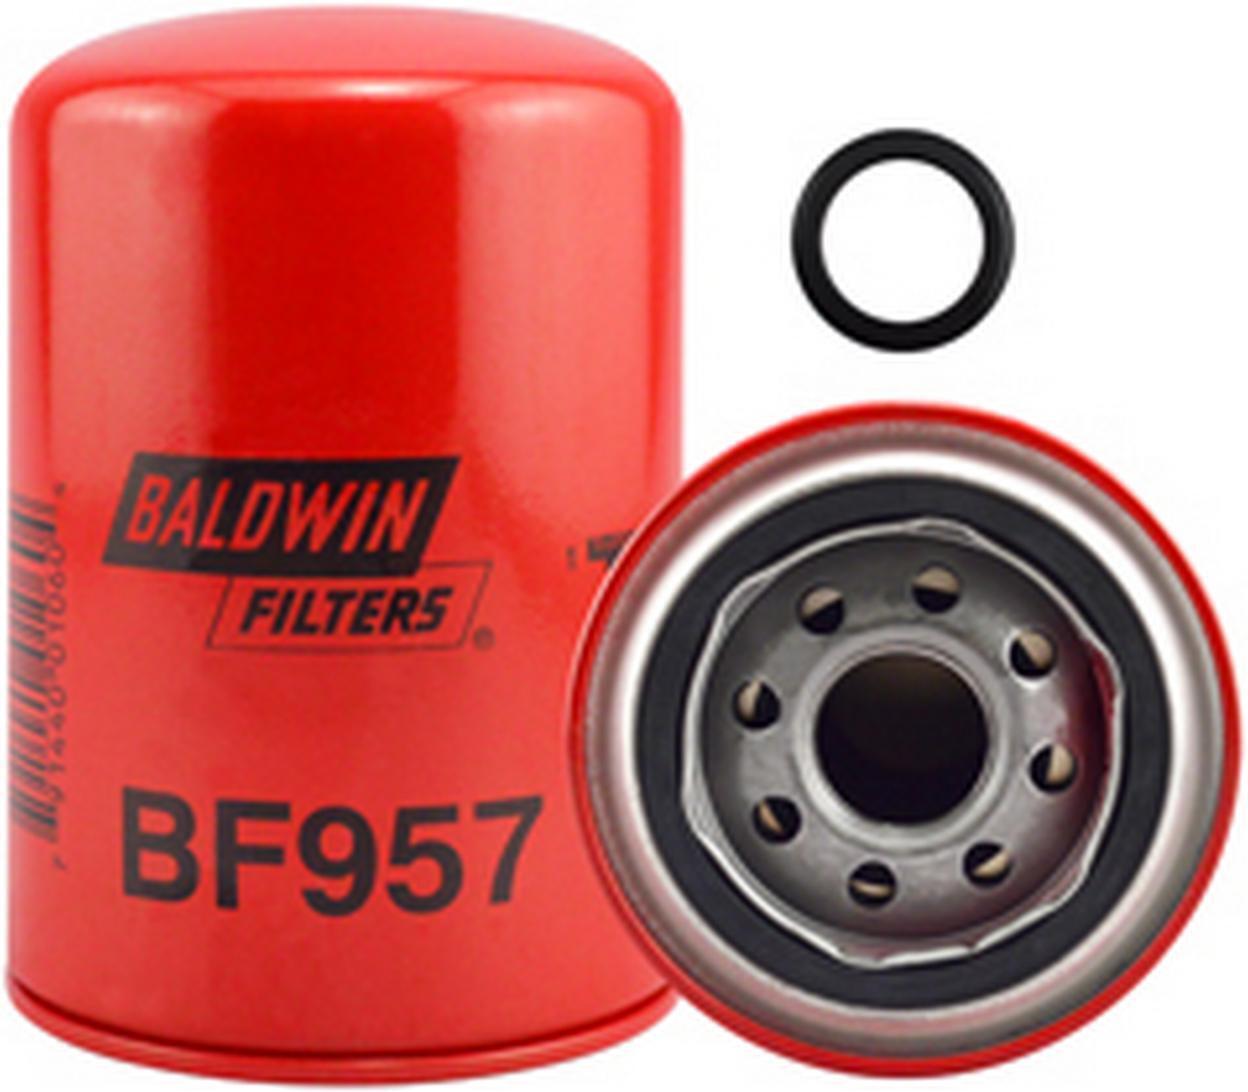 Baldwin BF957 Fuel Spin-on